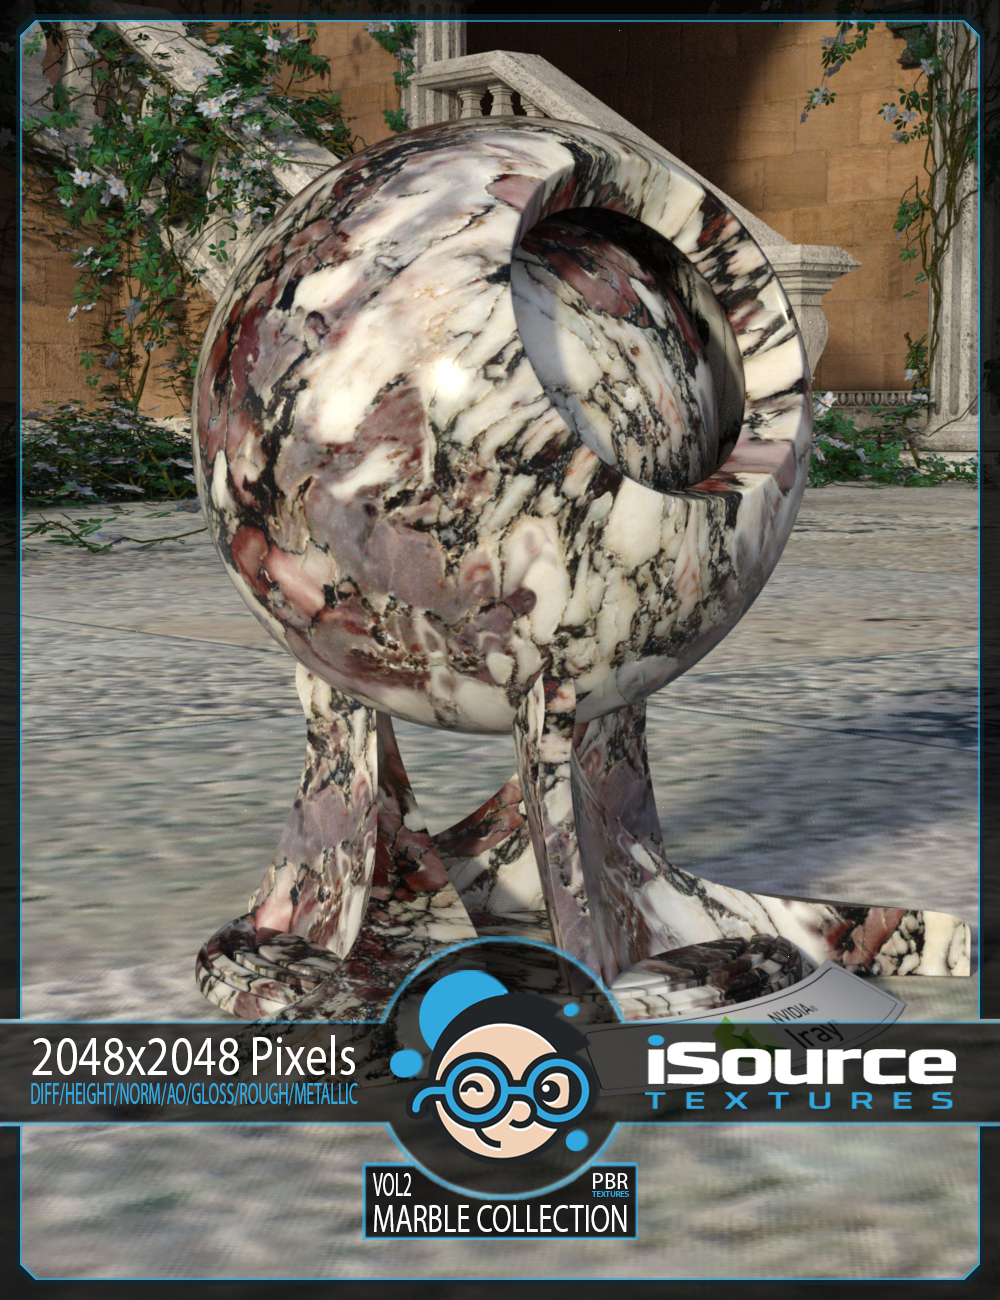 Marble Collection Merchant Resource - Vol2 (PBR Textures) by: iSourceTextures, 3D Models by Daz 3D